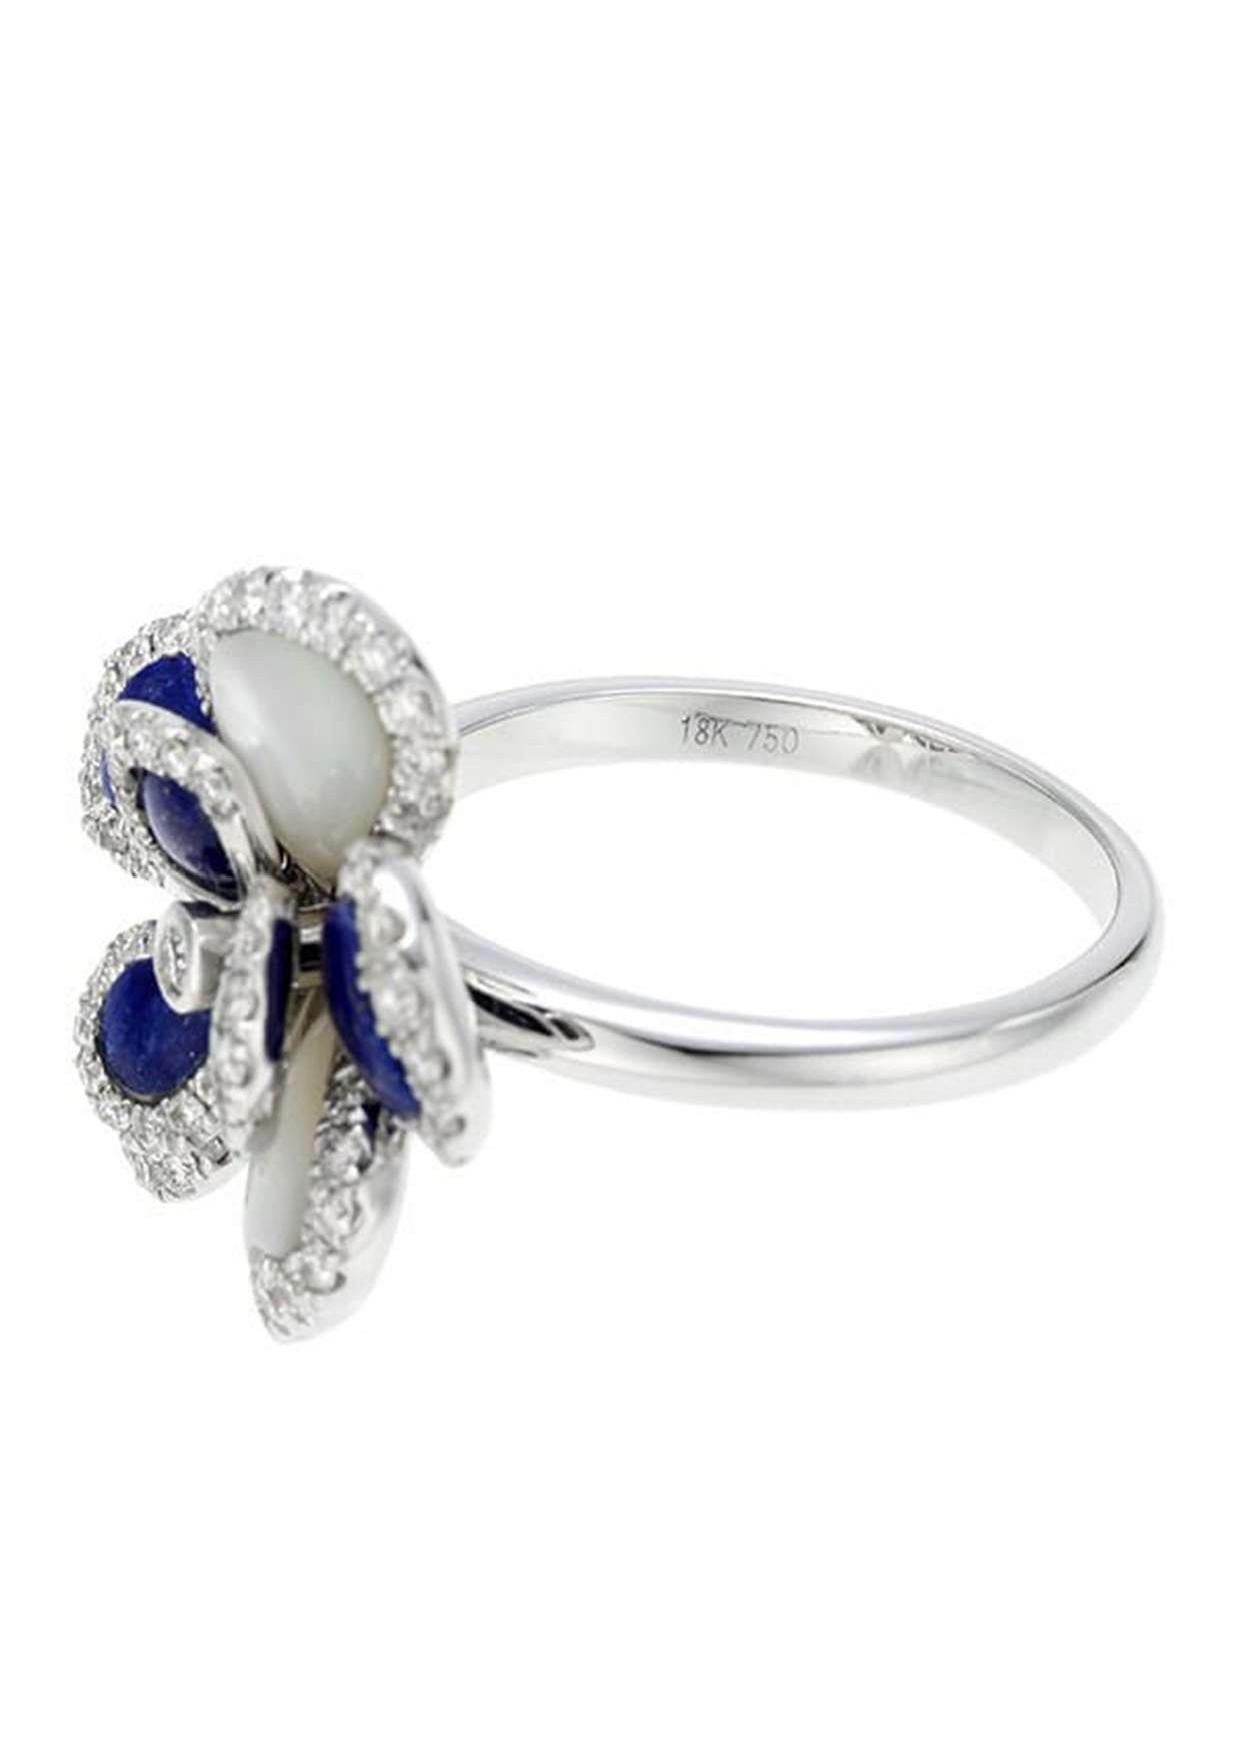 18K White Gold Lapis Lazuli Mother-of-Pearl Diamond Ring, Size 7.0 In New Condition For Sale In Holtsville, NY